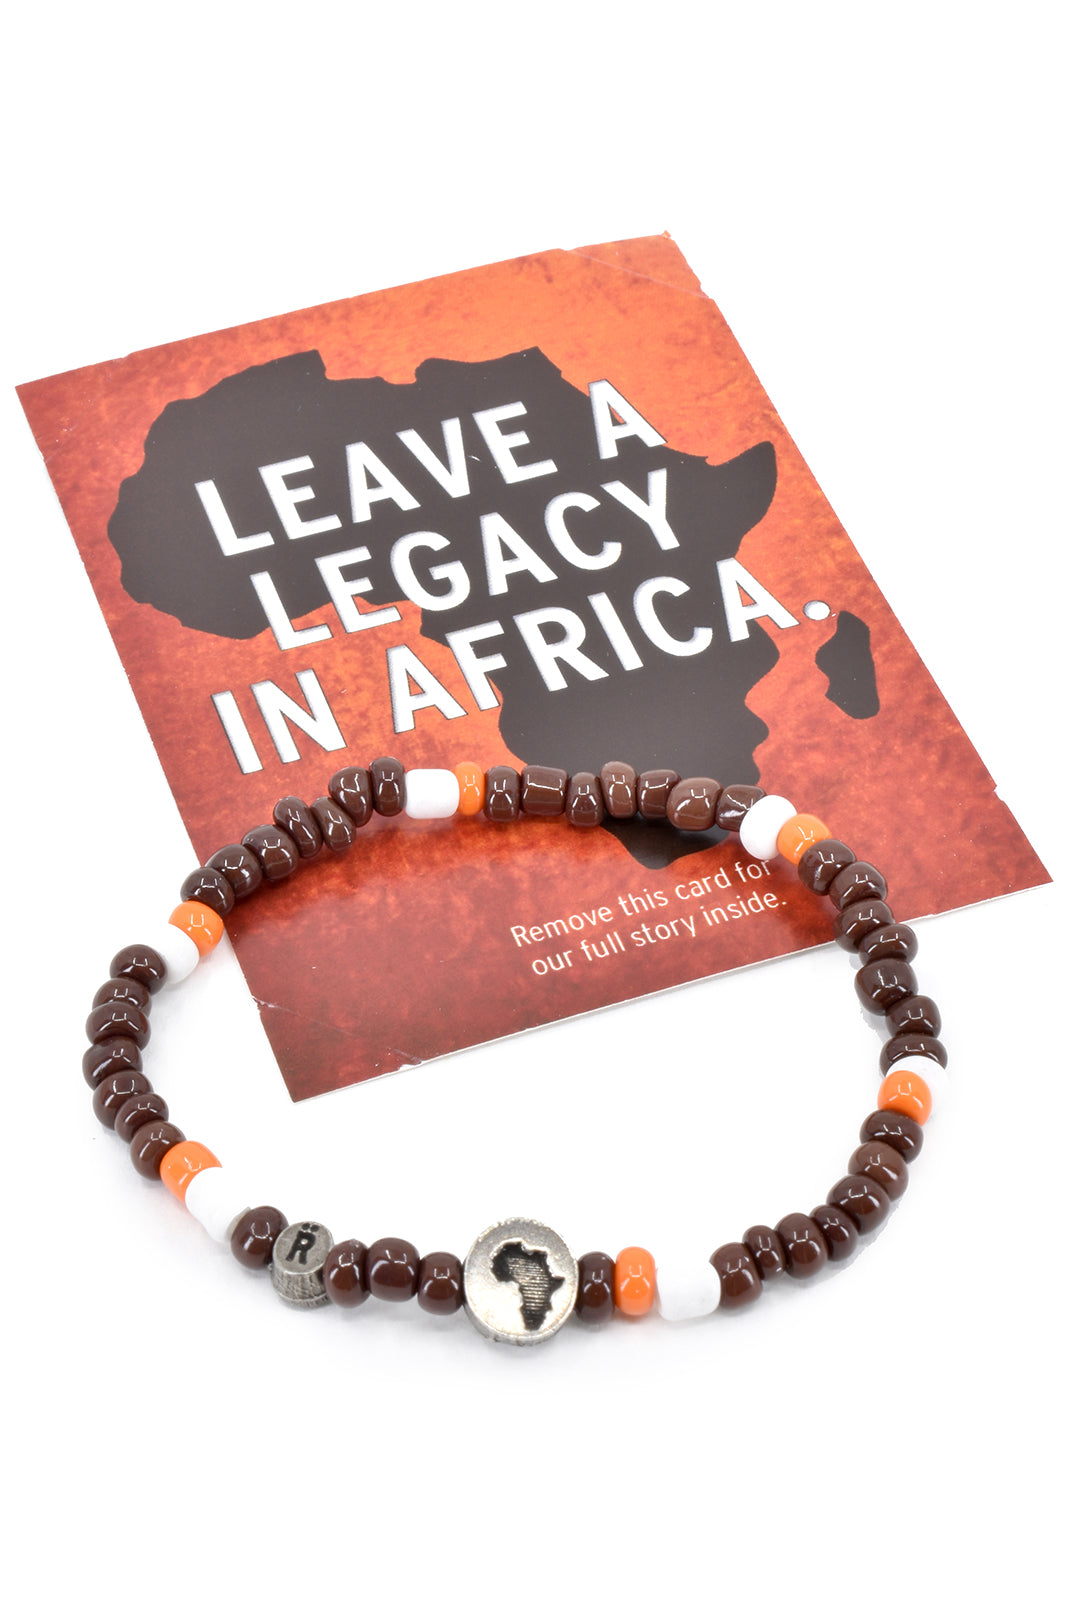 Protect a Child from Malaria South African Relate Cause Bracelet  Swahili  Modern